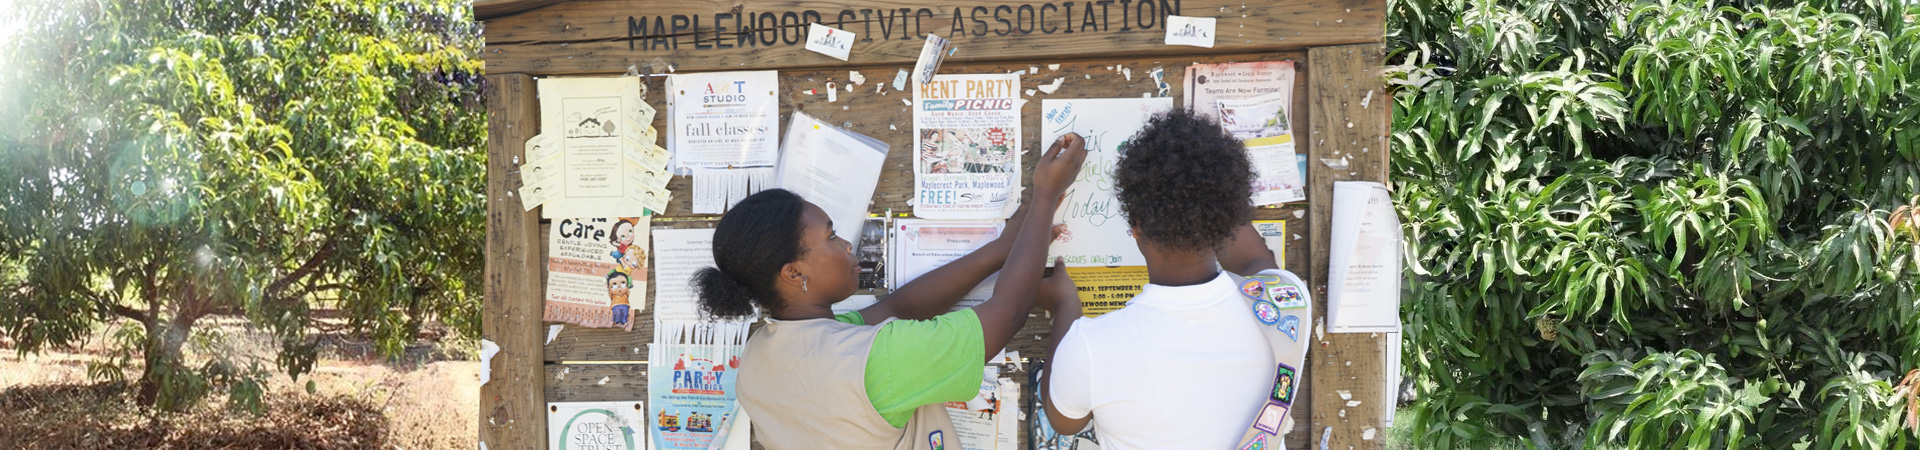  two girl scouts posting flyers on a community message board 